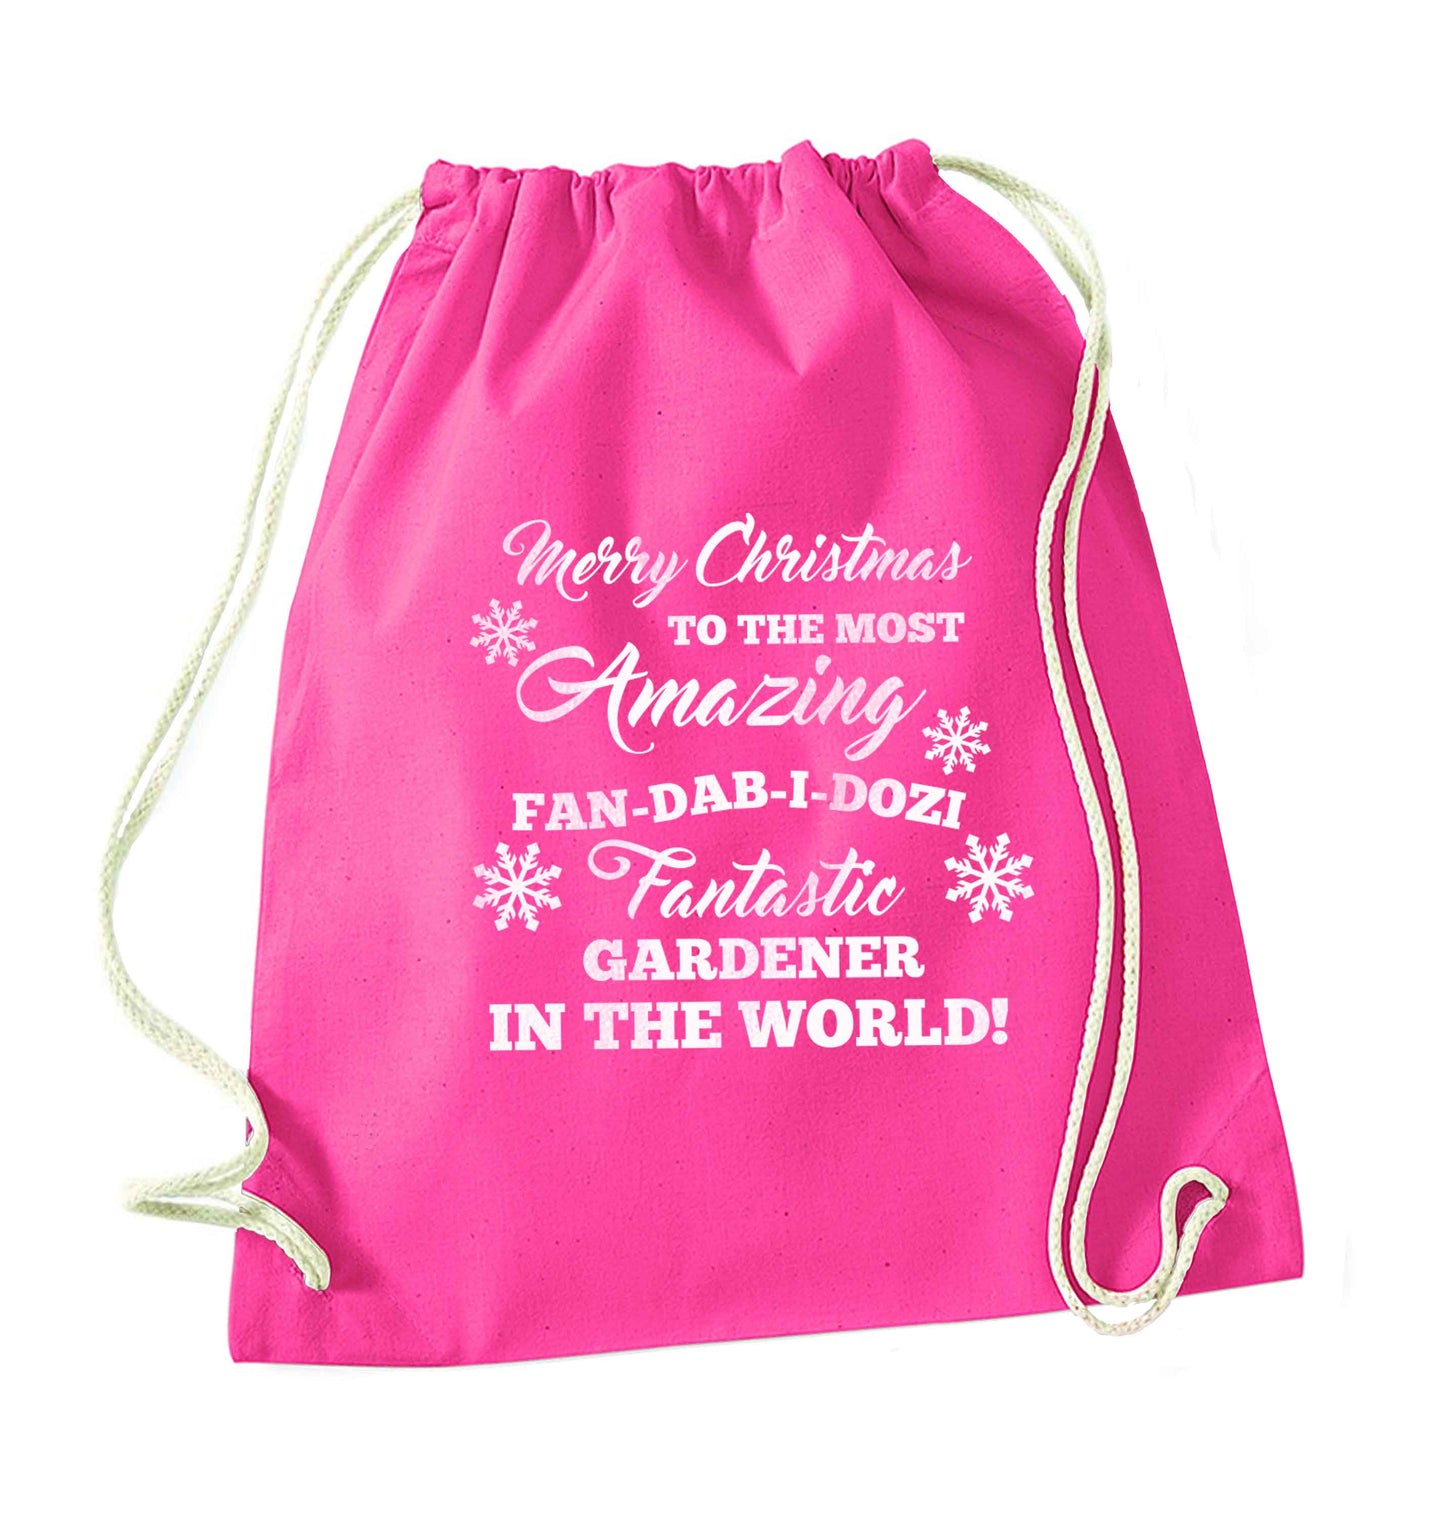 Merry Christmas to the most amazing gardener in the world! pink drawstring bag